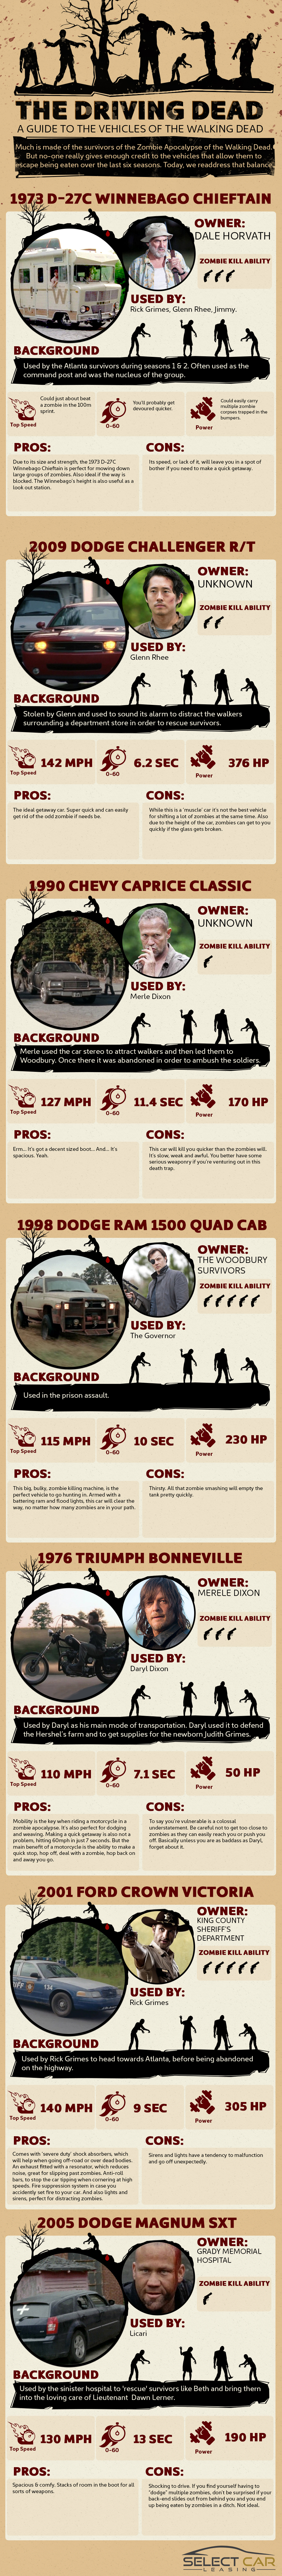 The Driving Dead: A Guide to the Vehicles of the Walking Dead